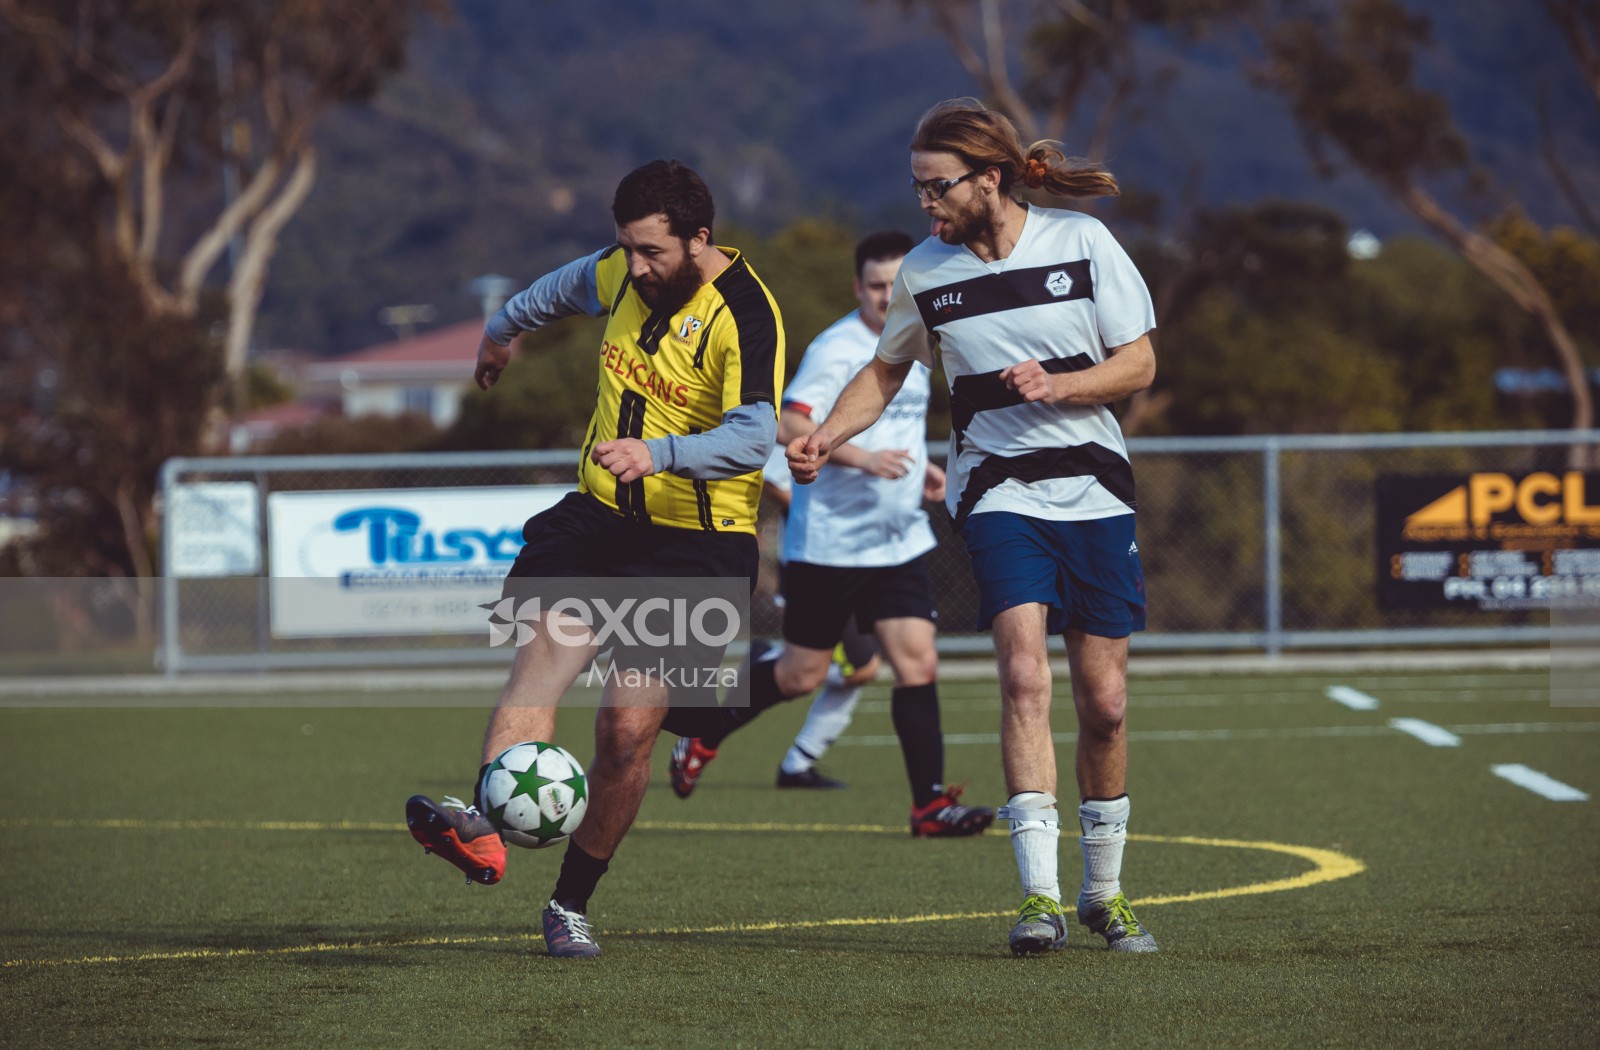 Chubby and long haired player with ponytail - Sports Zone sunday league